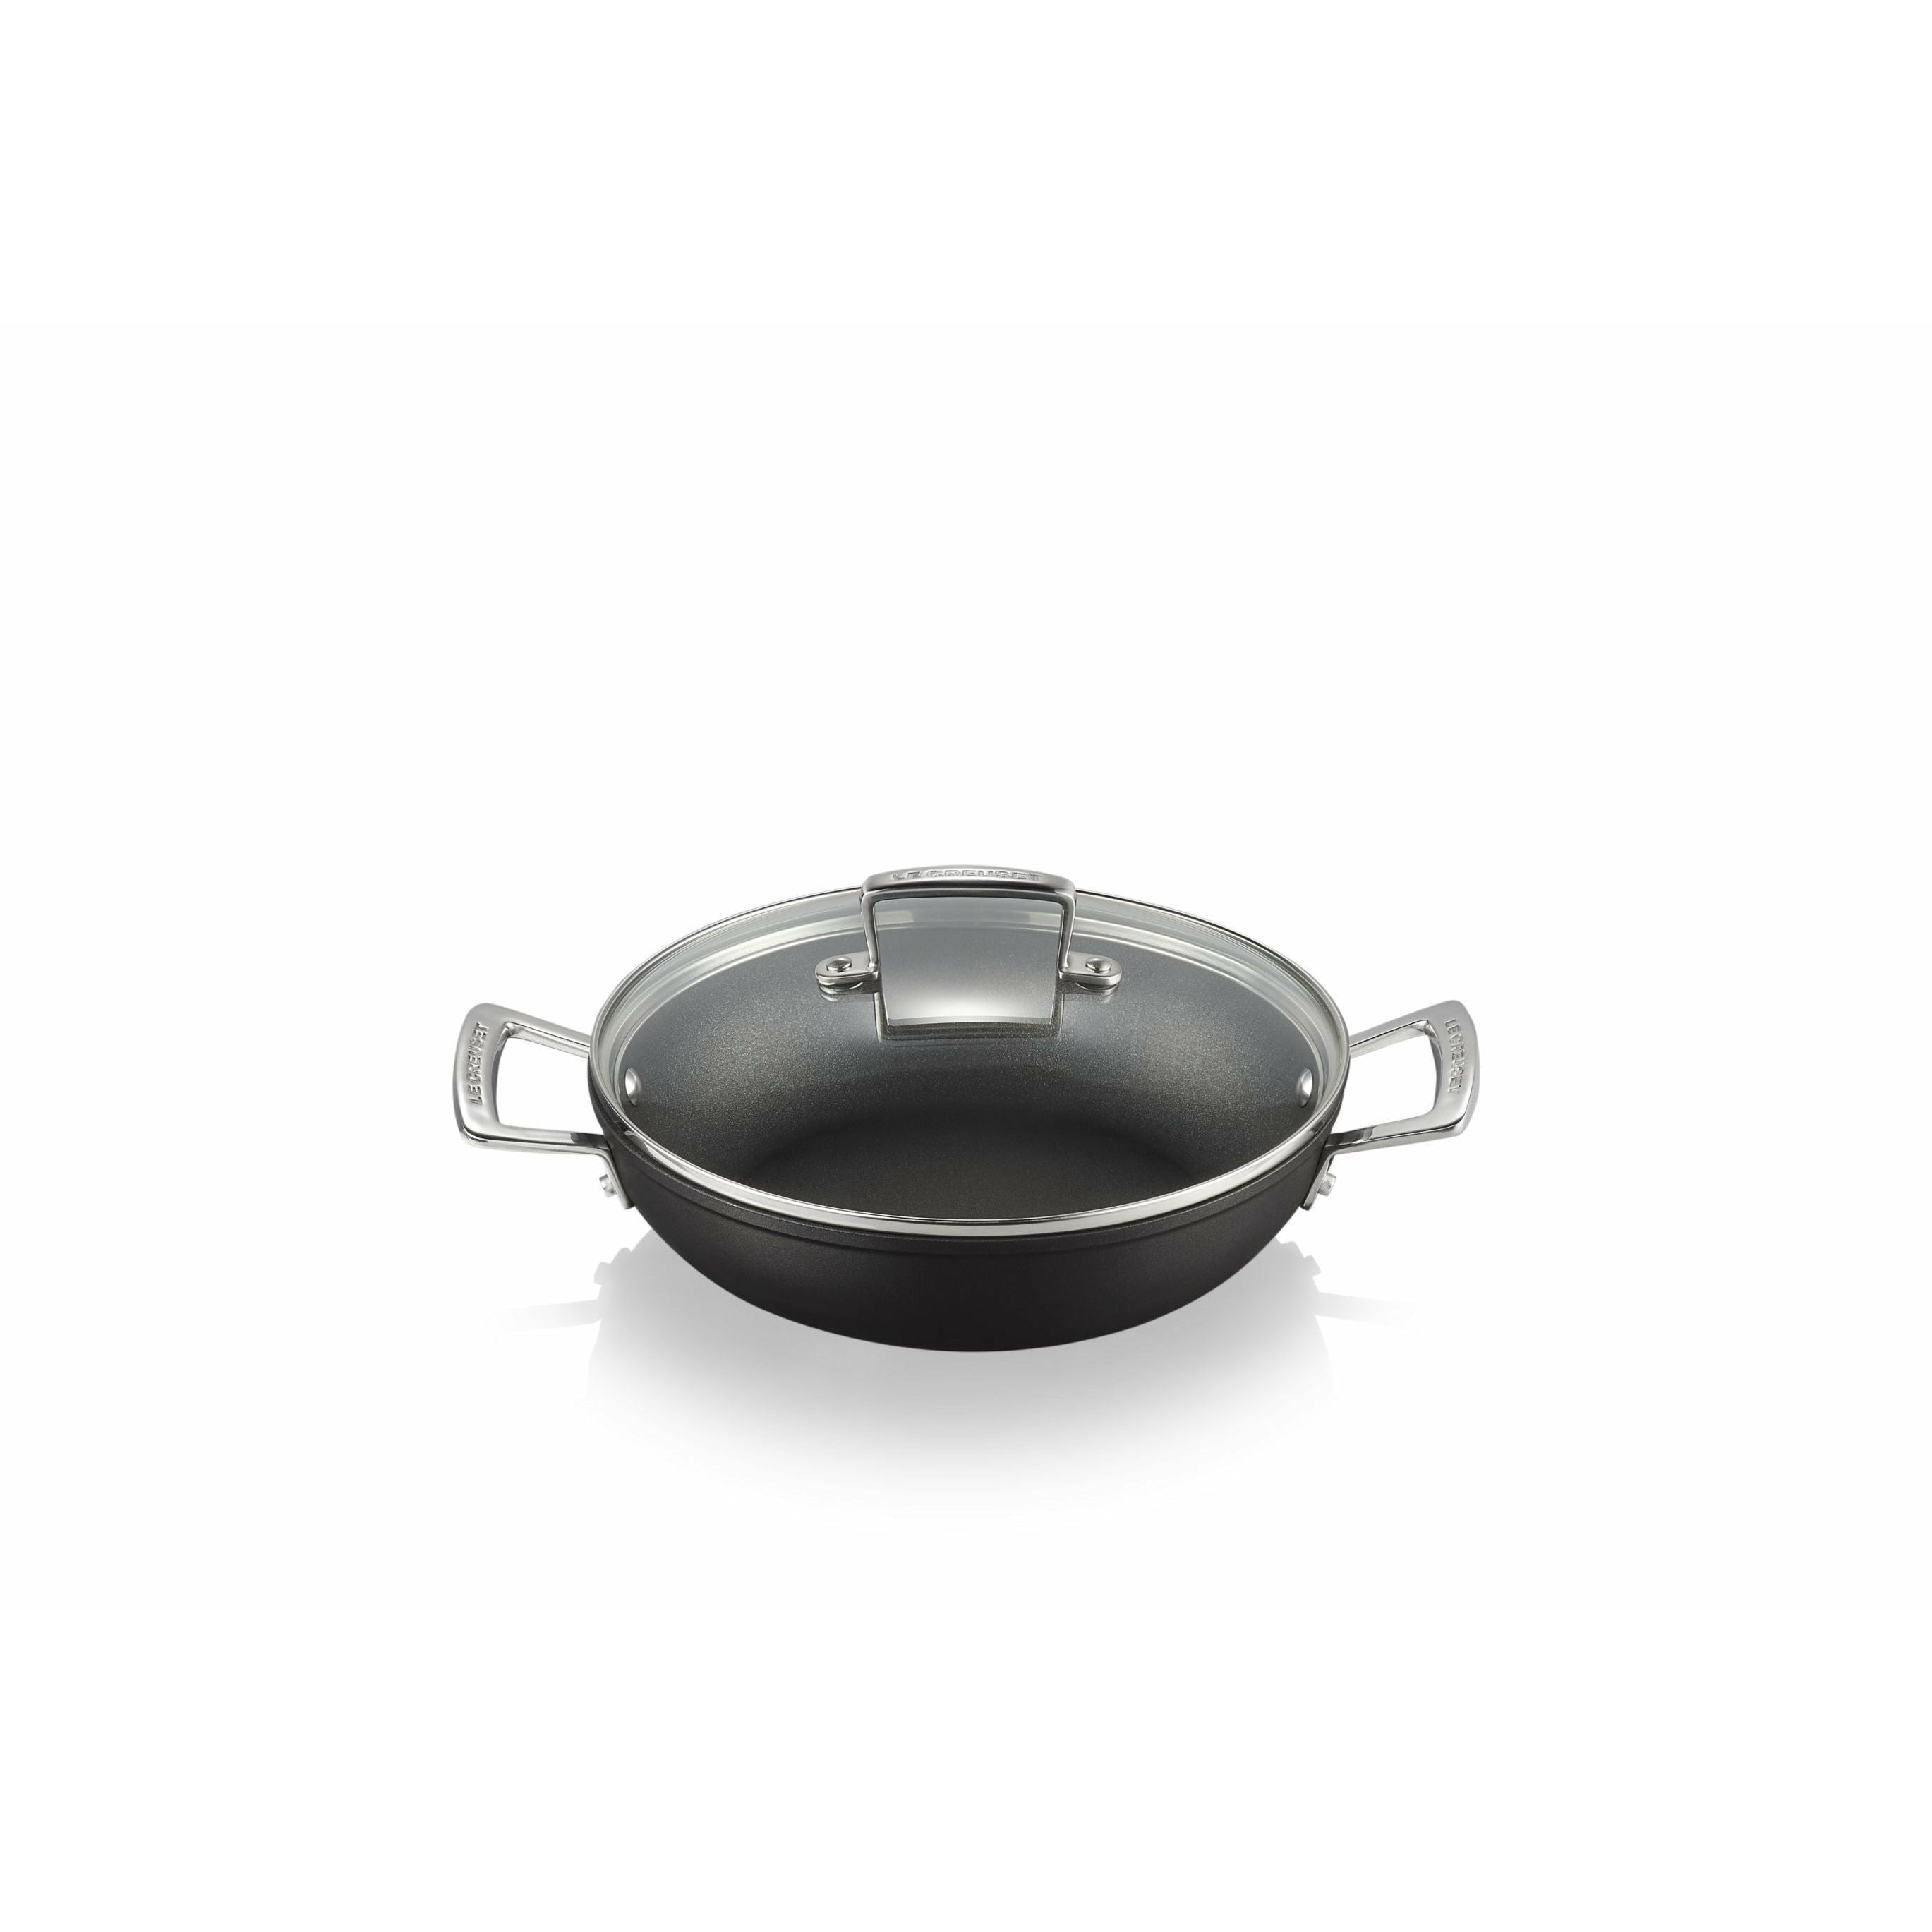 Le Creuset Alu Professional Pan With Glass Lid, 24 Cm